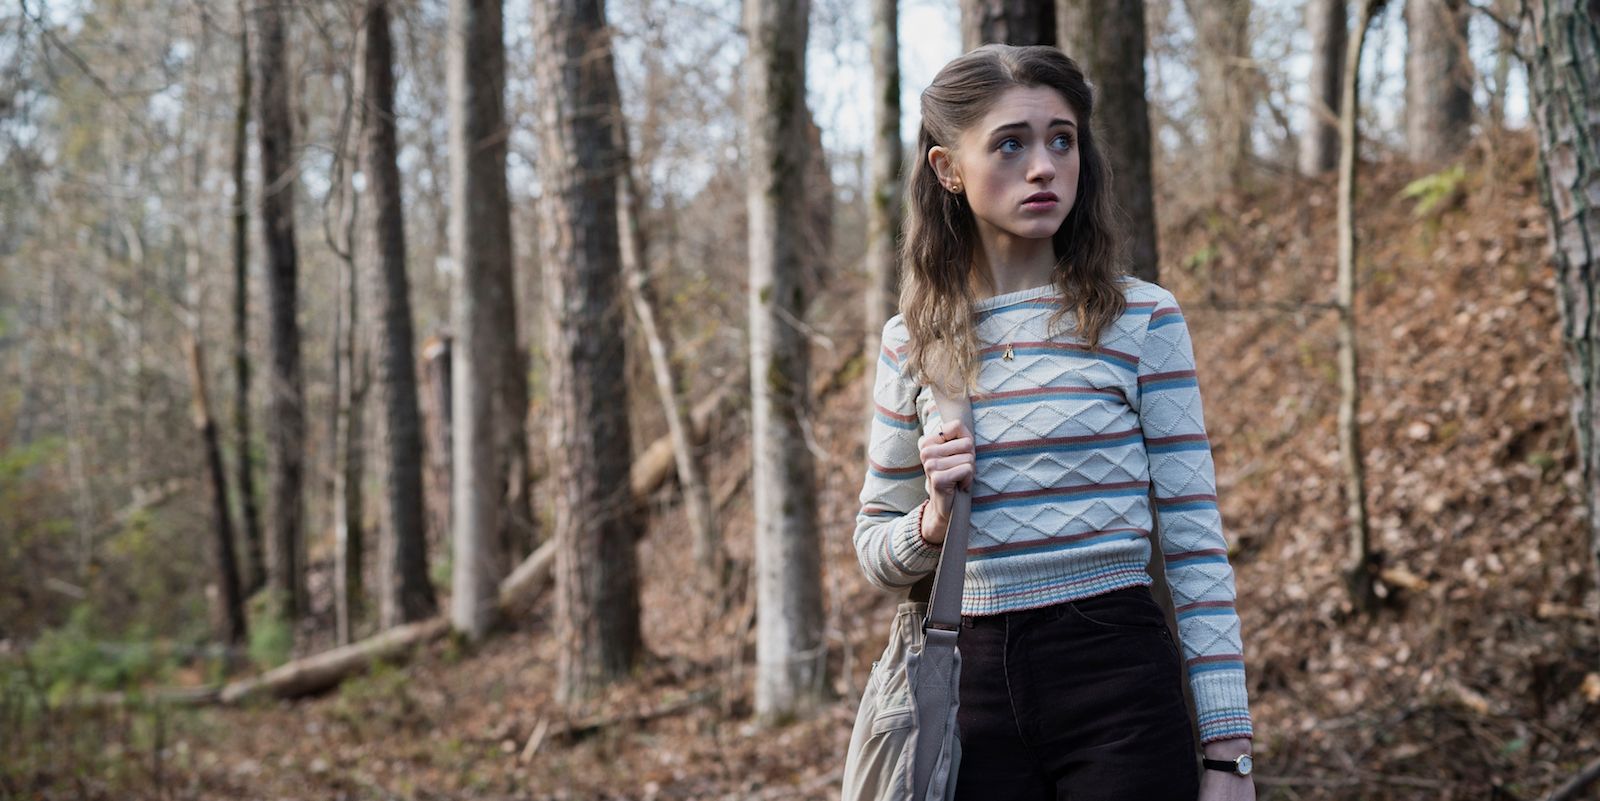 Nancy at the woods in Stranger Things.